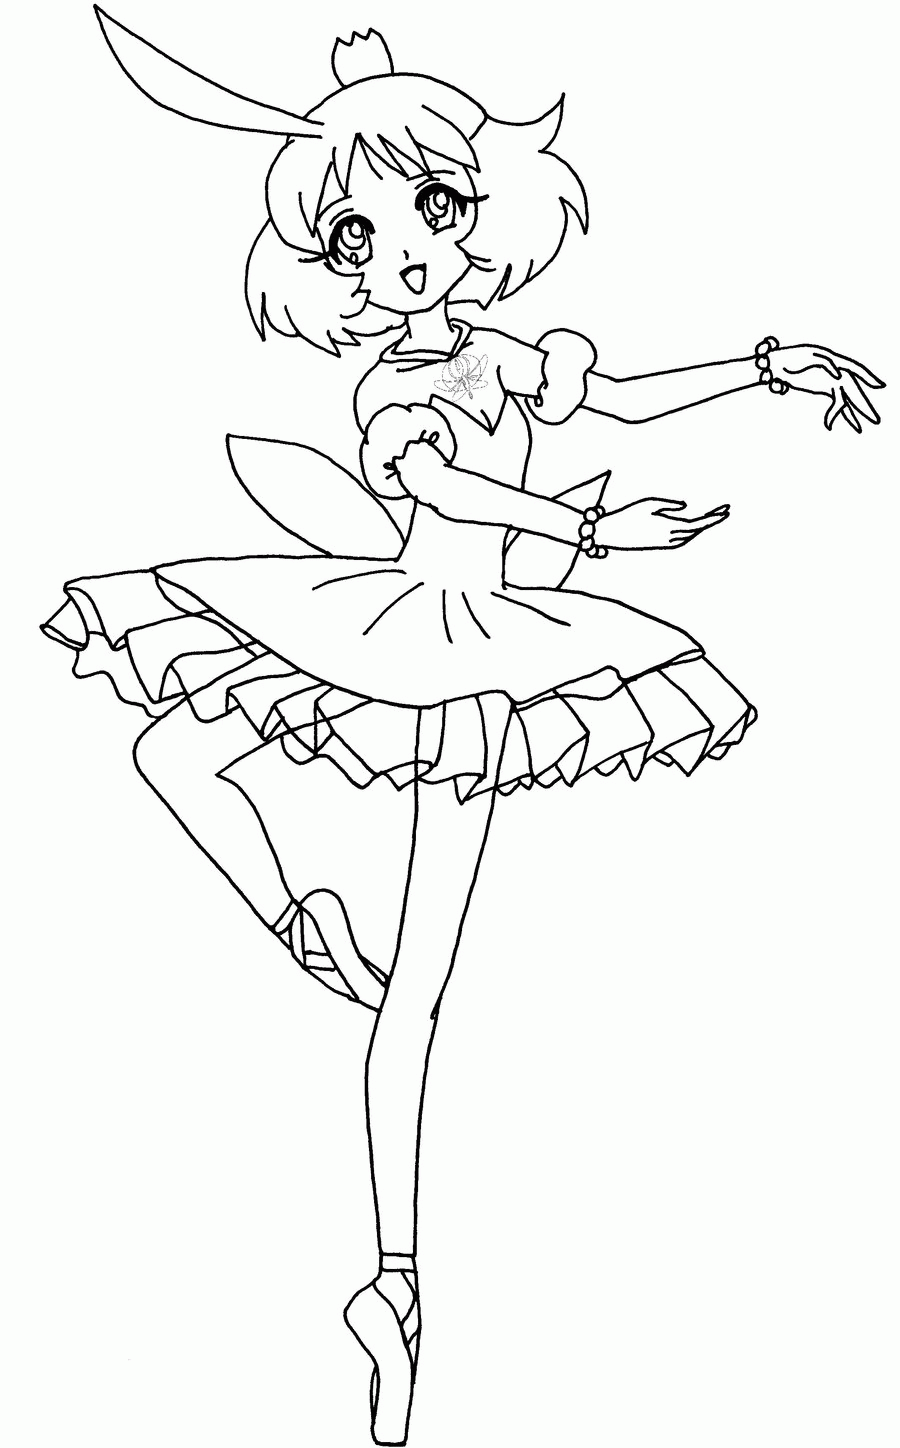 Anime Princess Coloring Pages - Coloring Home